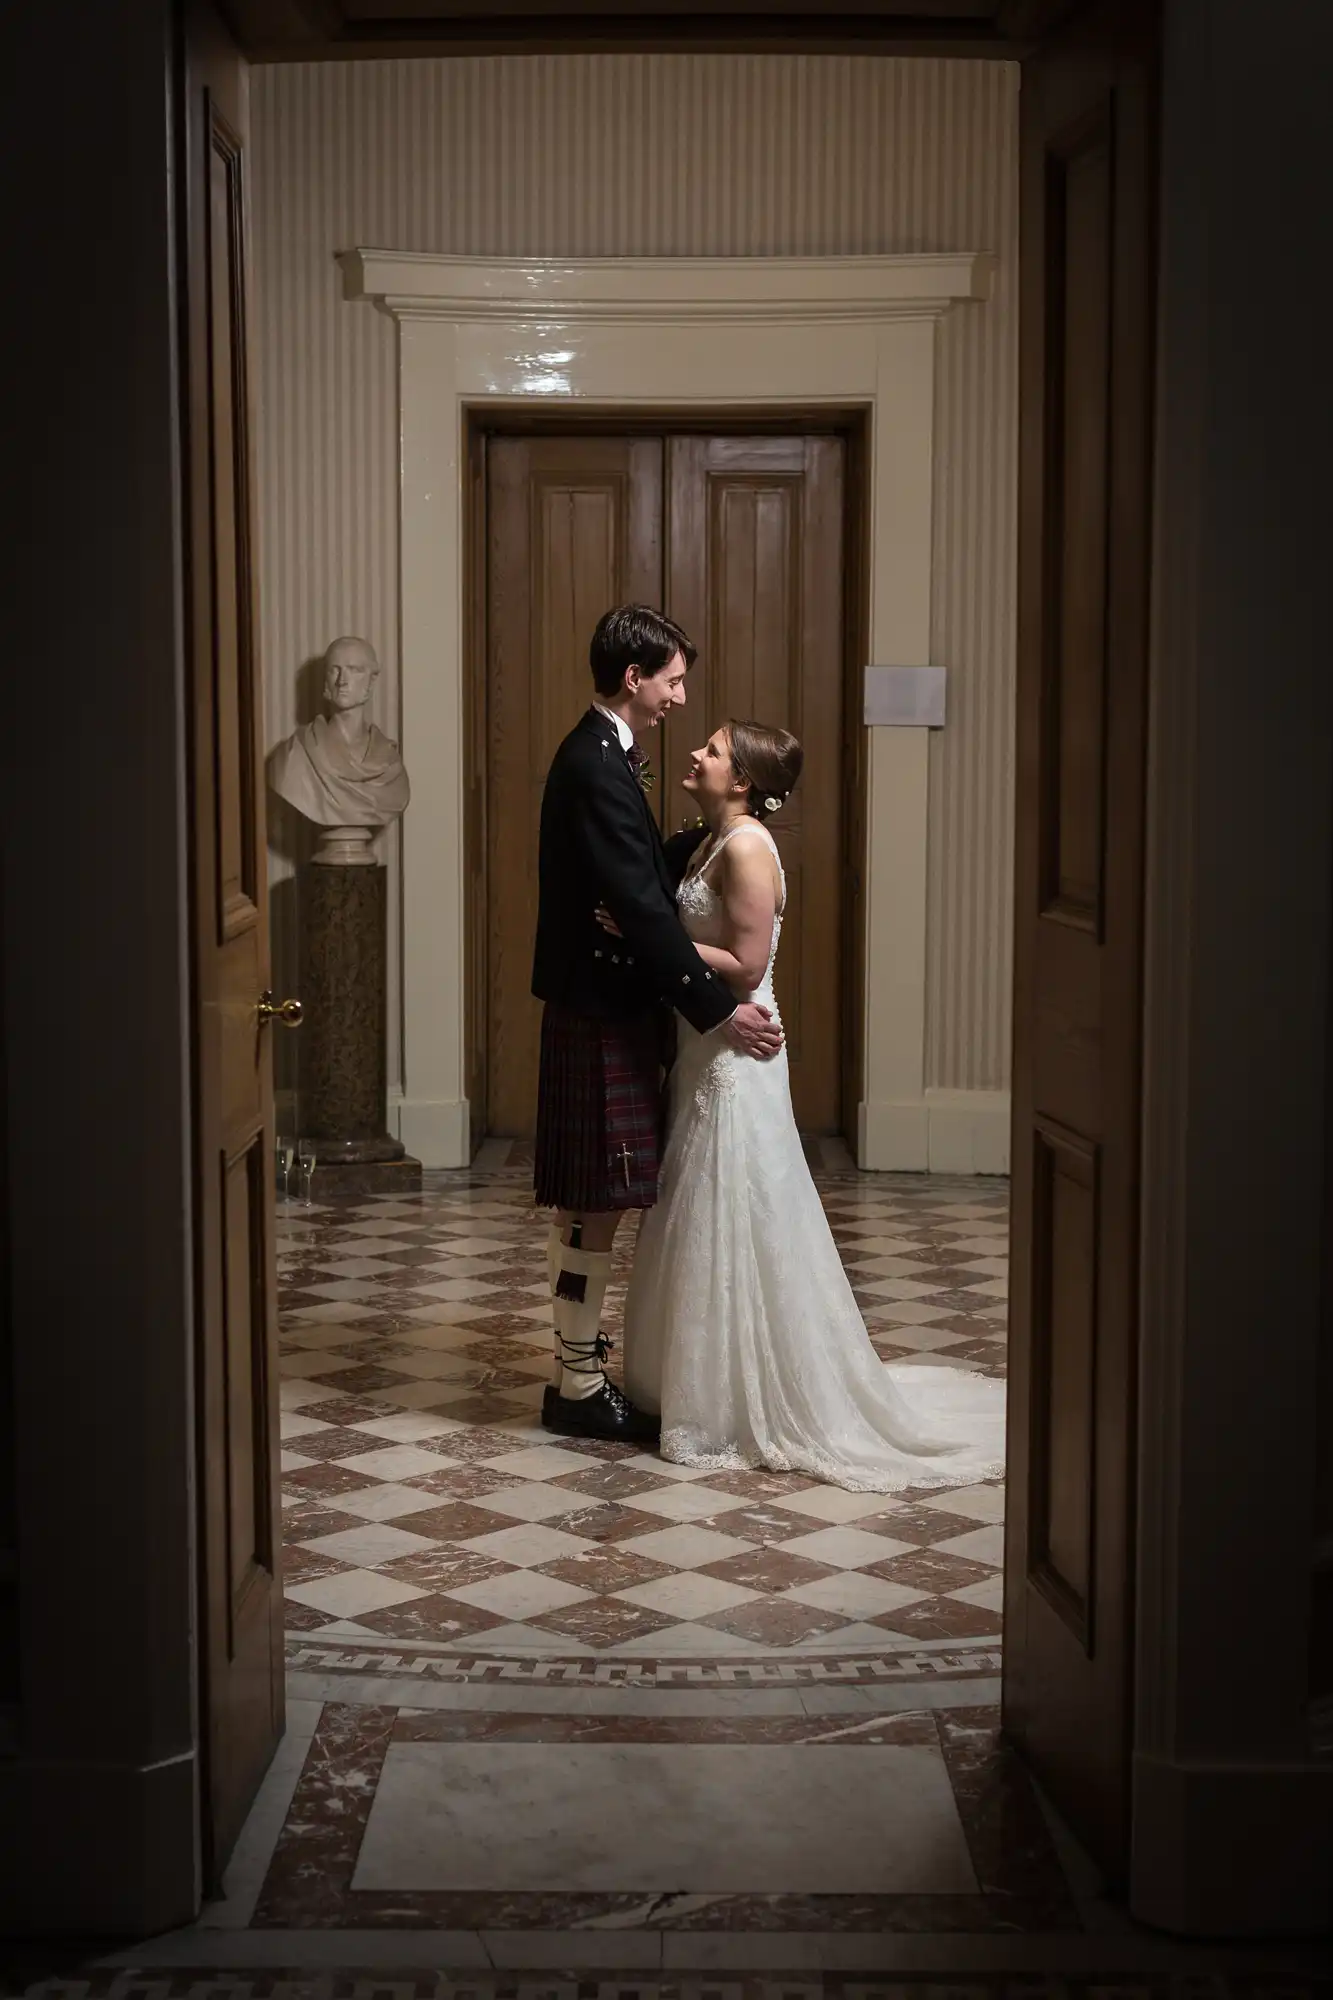 A bride in a white gown and a groom in a kilt share an intimate moment in a dimly lit hallway with classical decor.